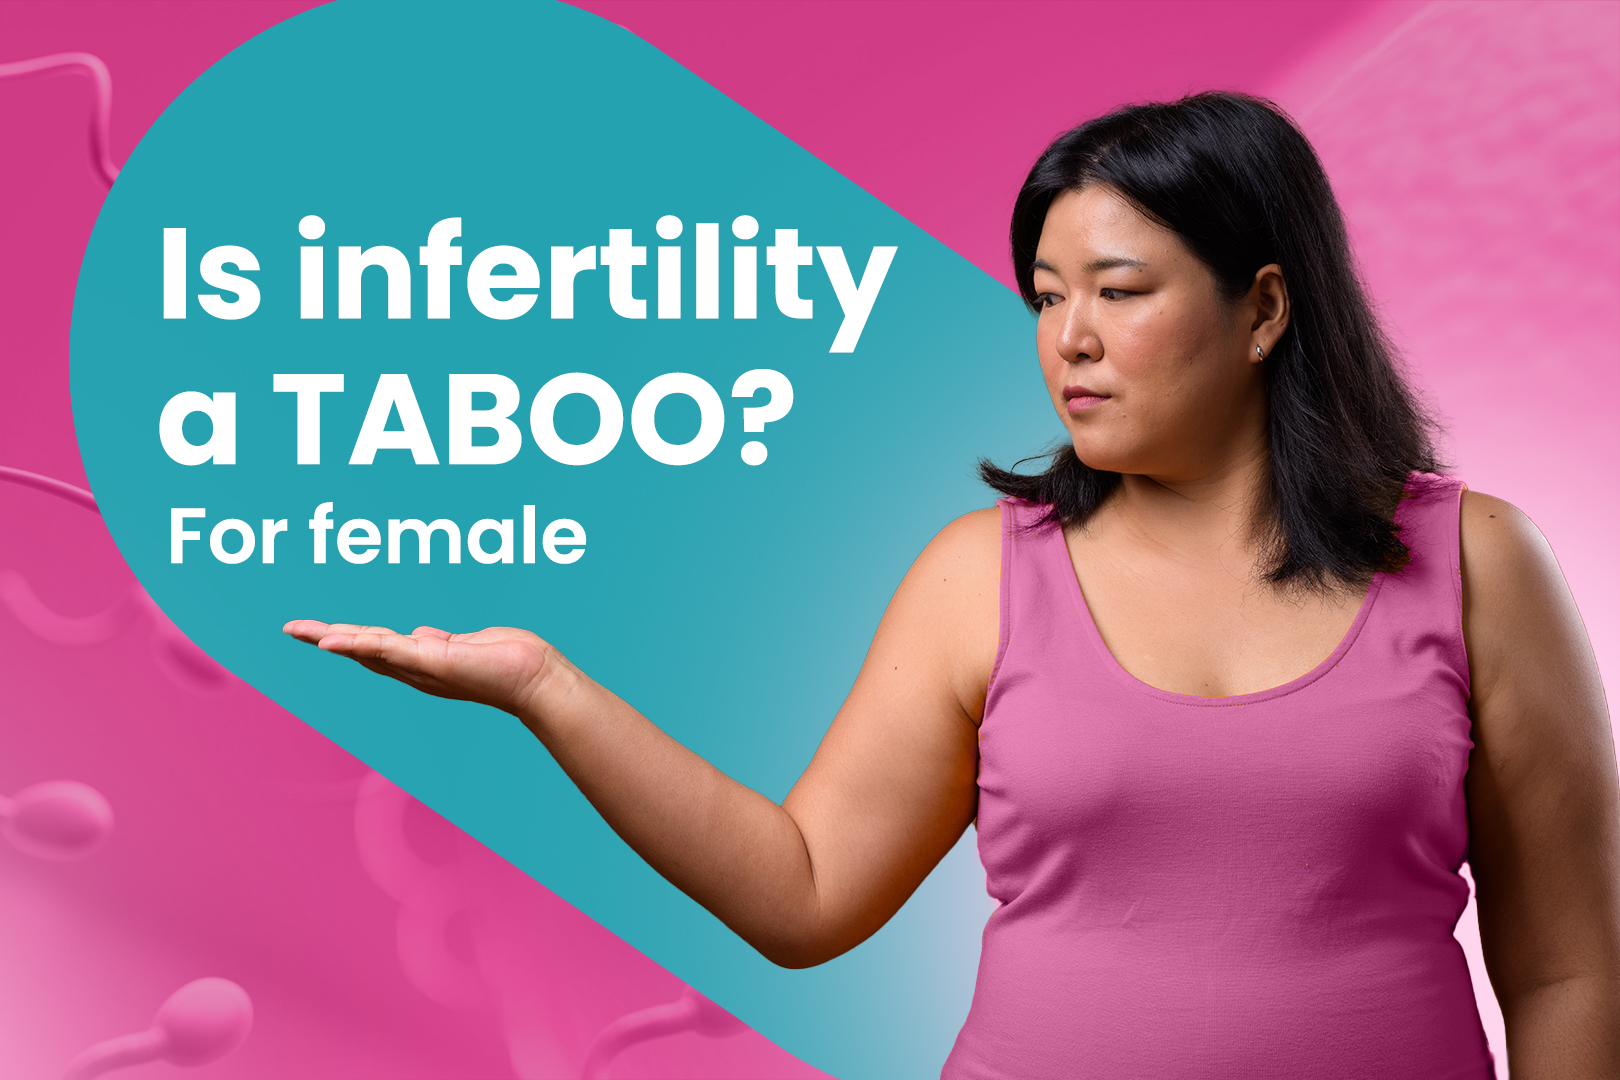 Is infertility a TABOO? For female